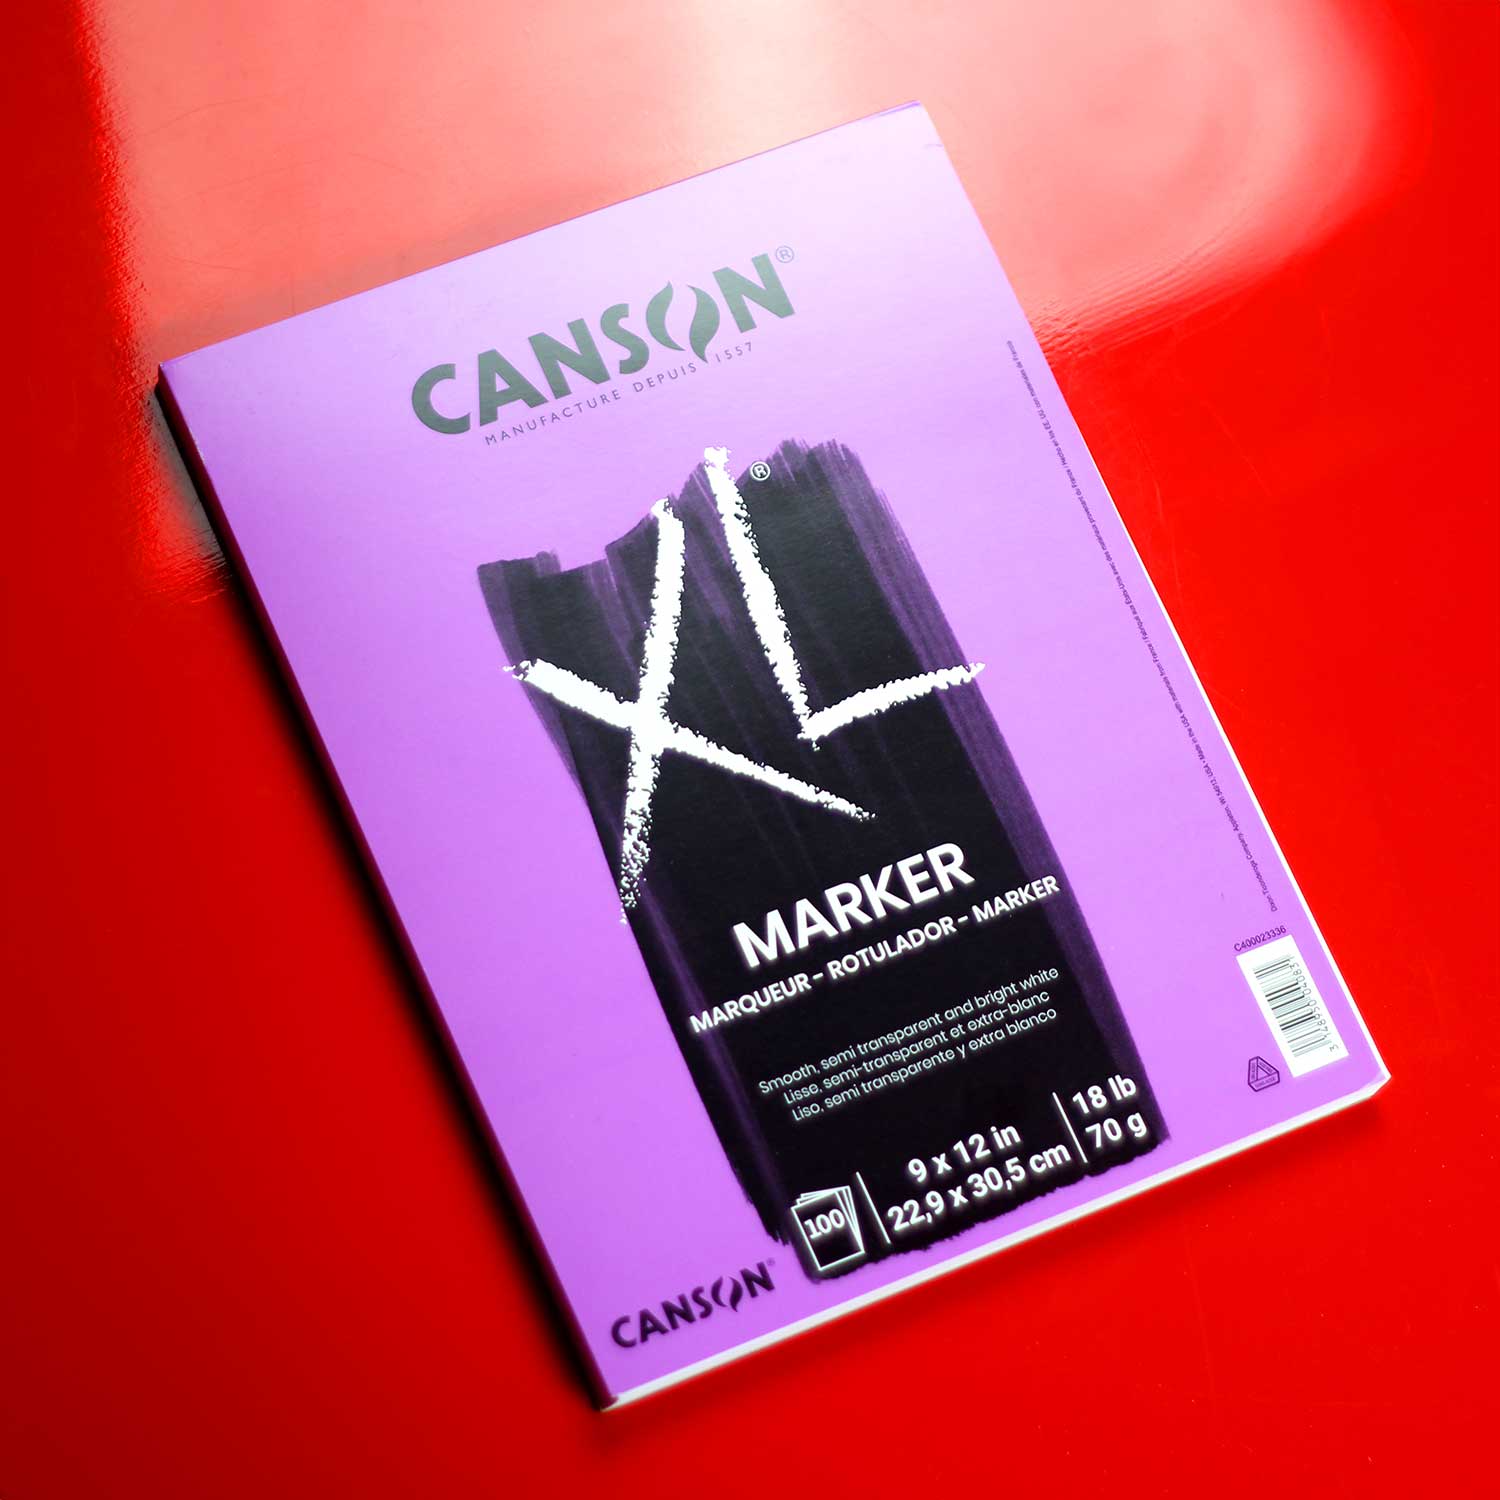 Canson Marker Paper